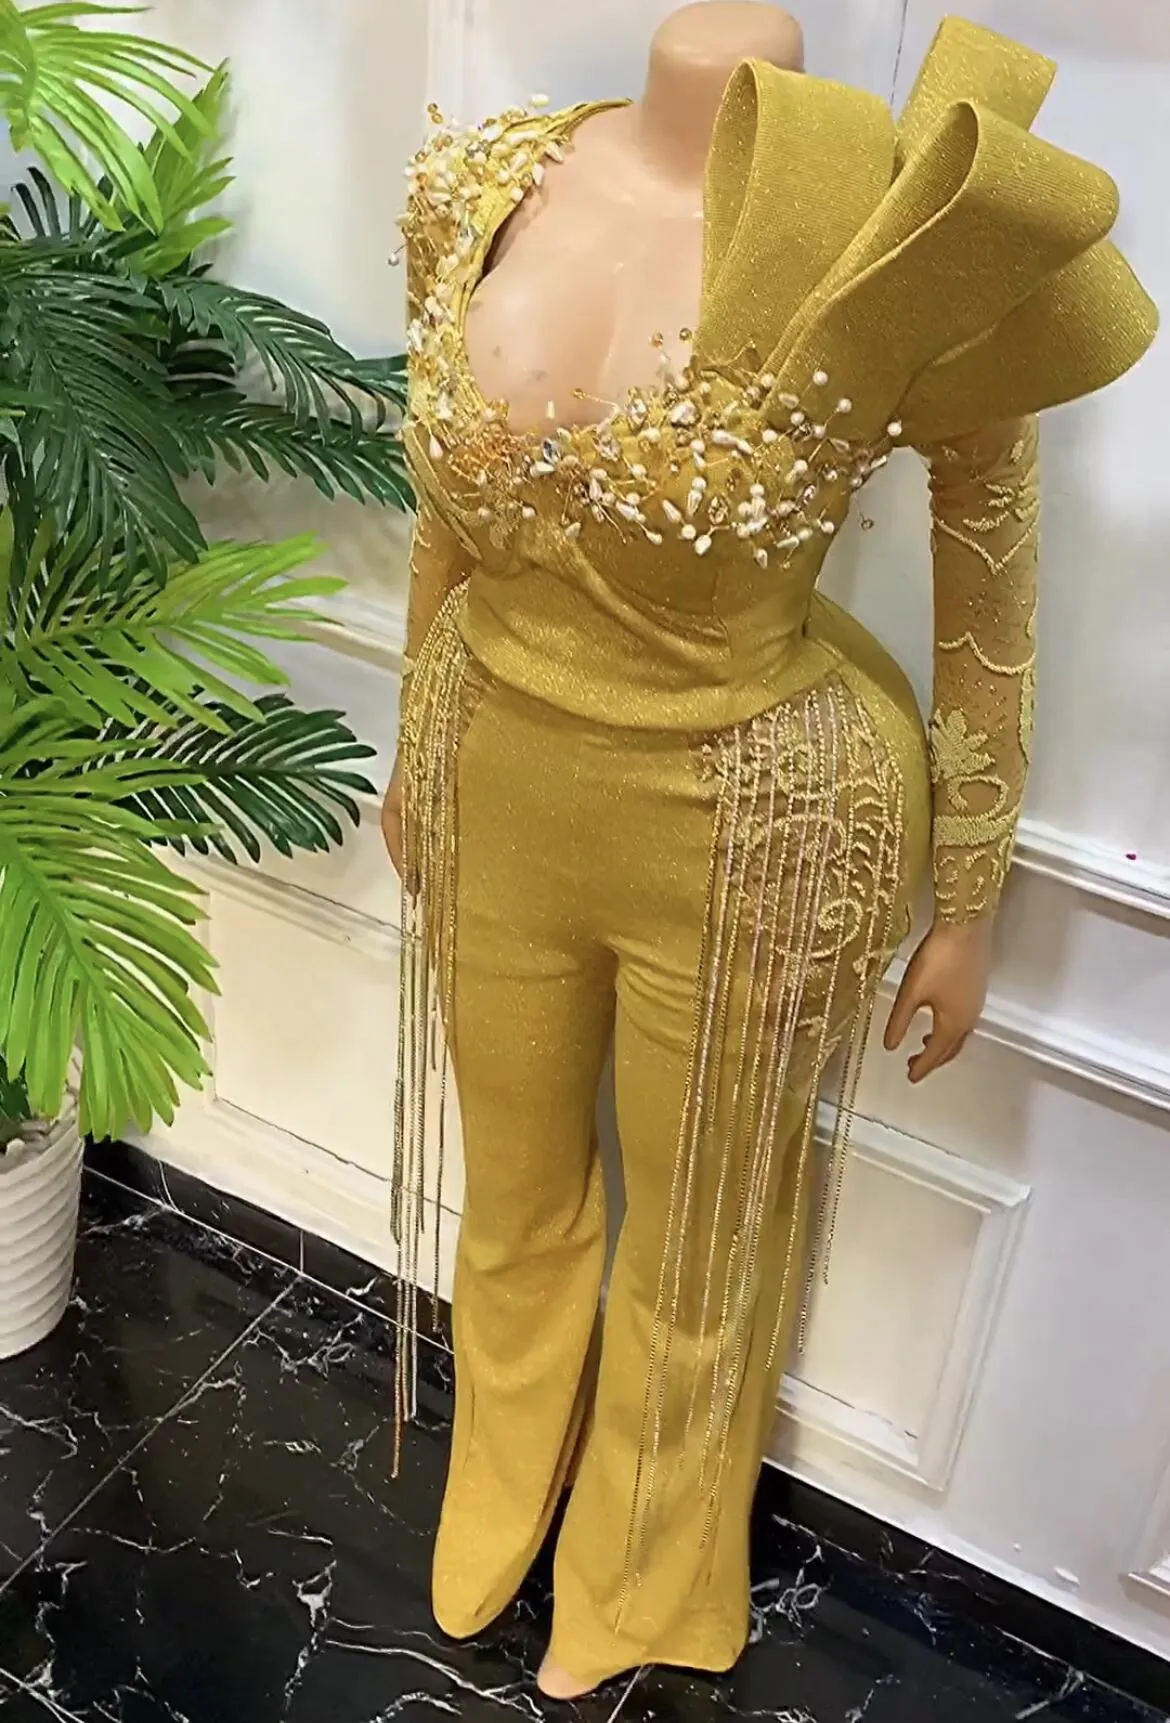 2023 August Aso Gold Sheath Jumpsuits Prom Dress Beaded Crystals Evening Formal Party Second Reception Birthday Engagement Gowns Dresses Robe De Soiree ZJ787